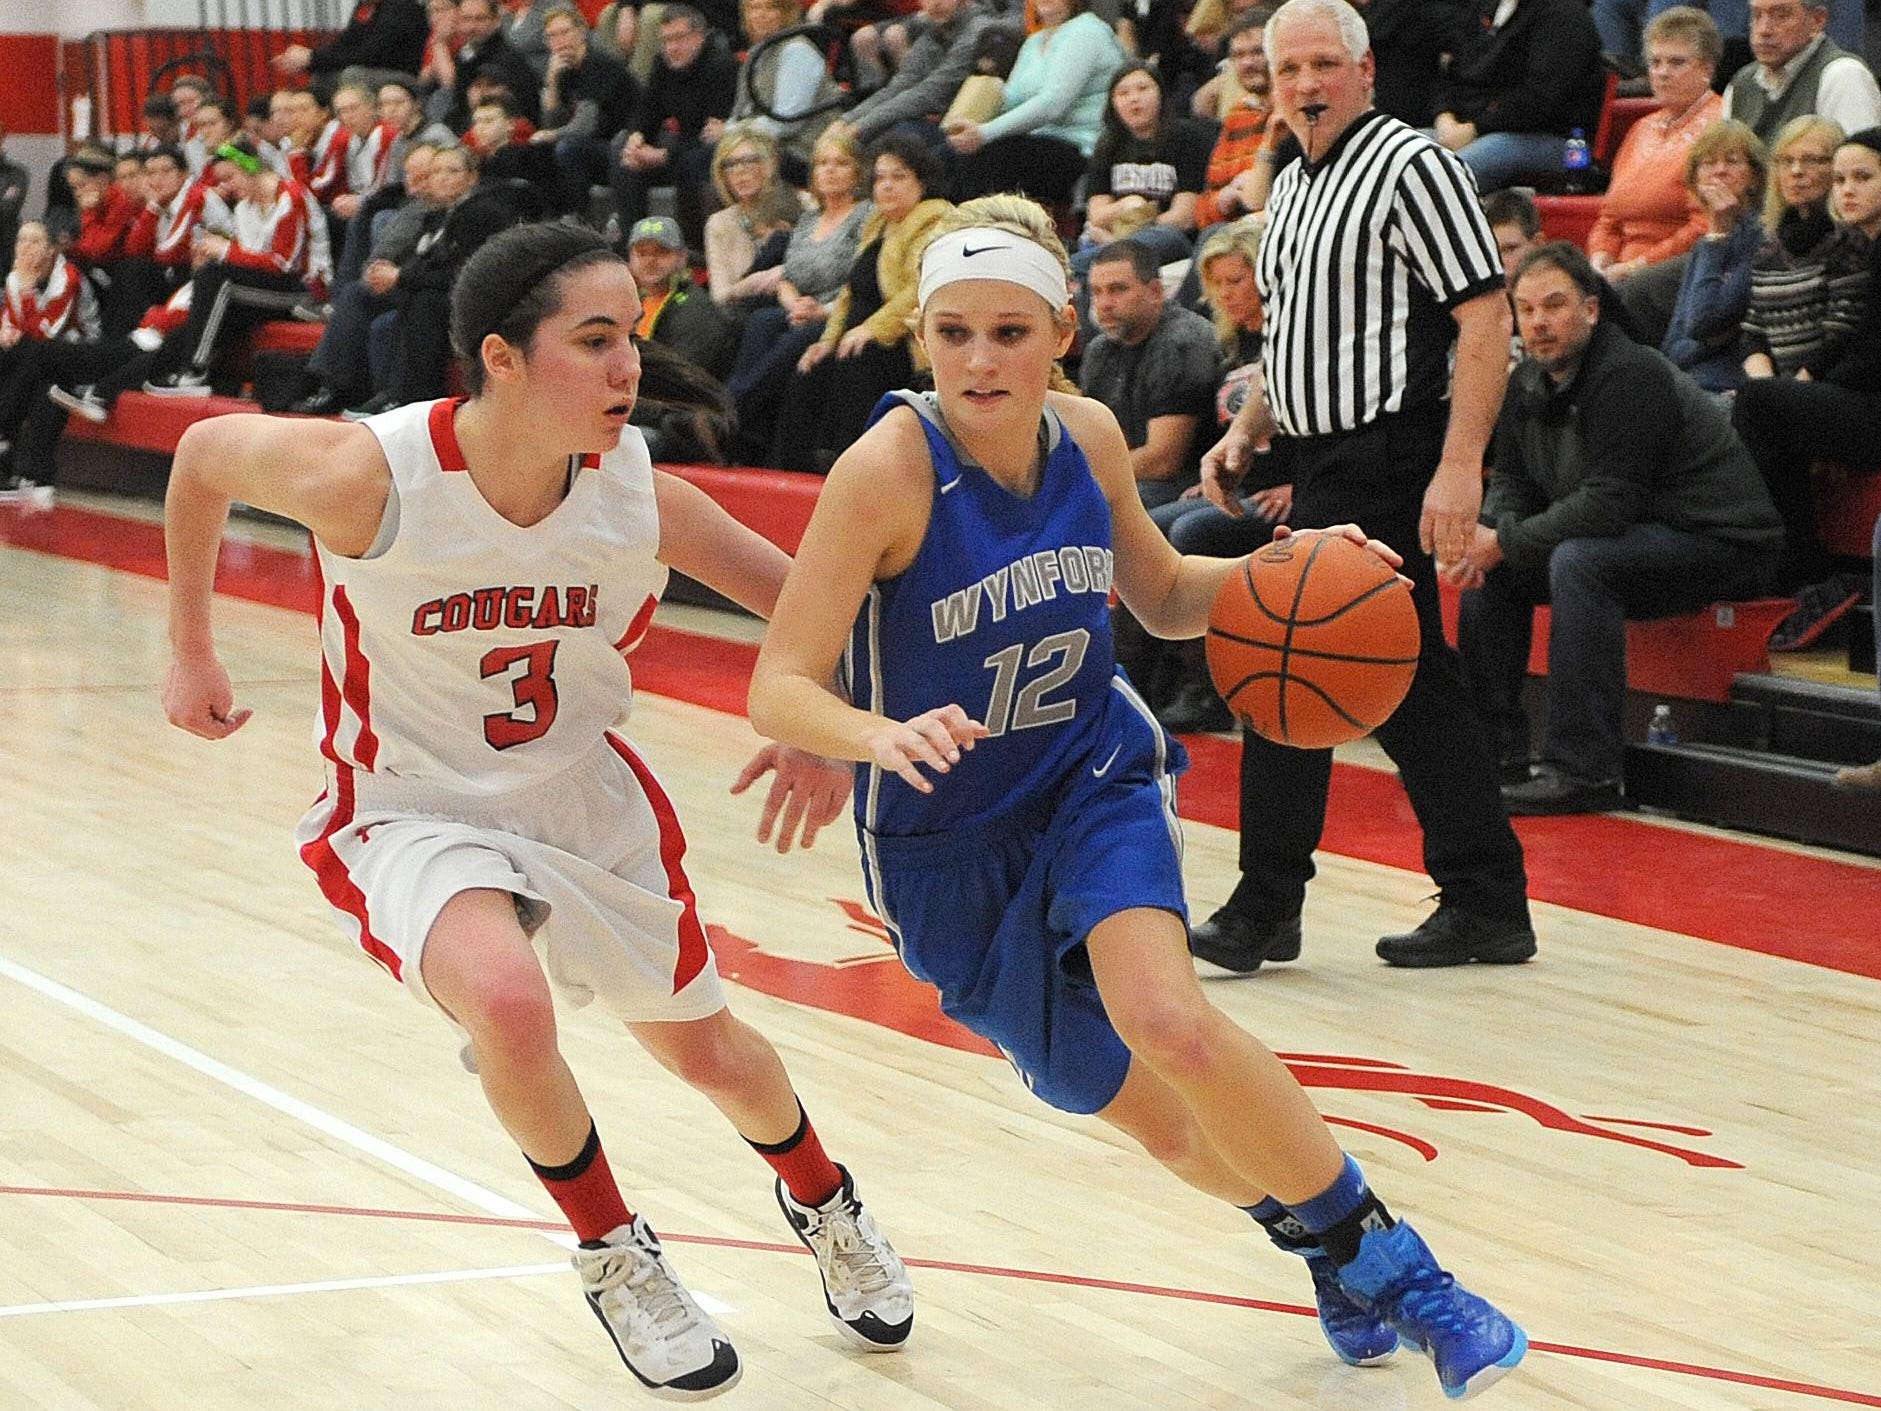 Wynford’s Ellie Richmond drives to the basket against Crestview this past season. She earned All-Ohio honorable mention.